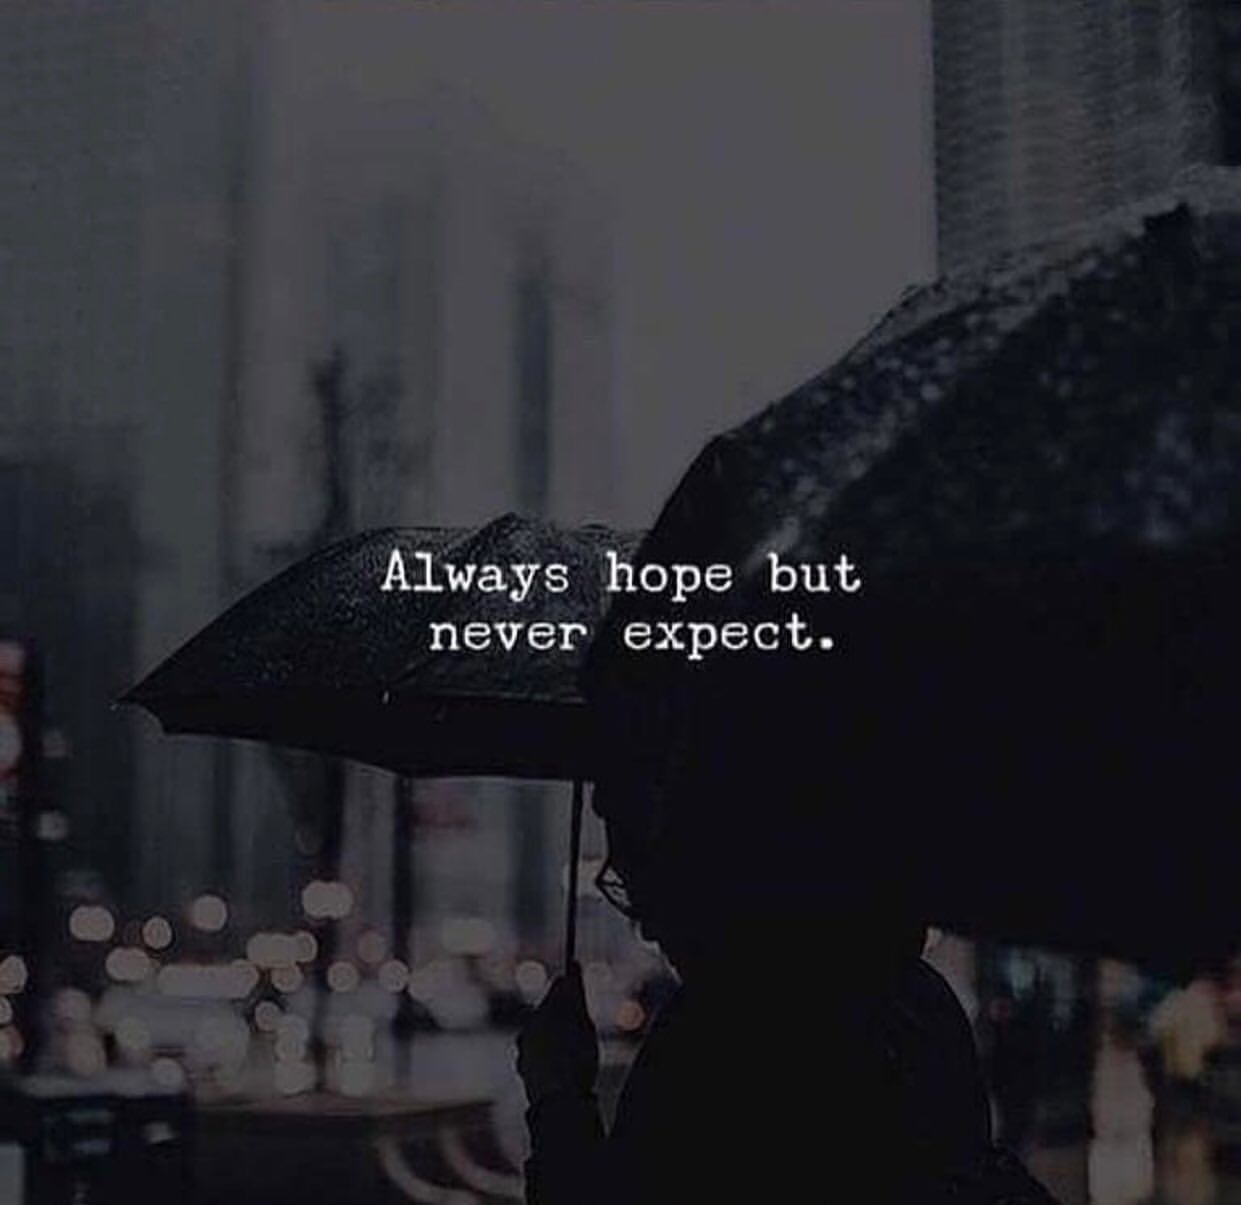 Always hope but never expect.